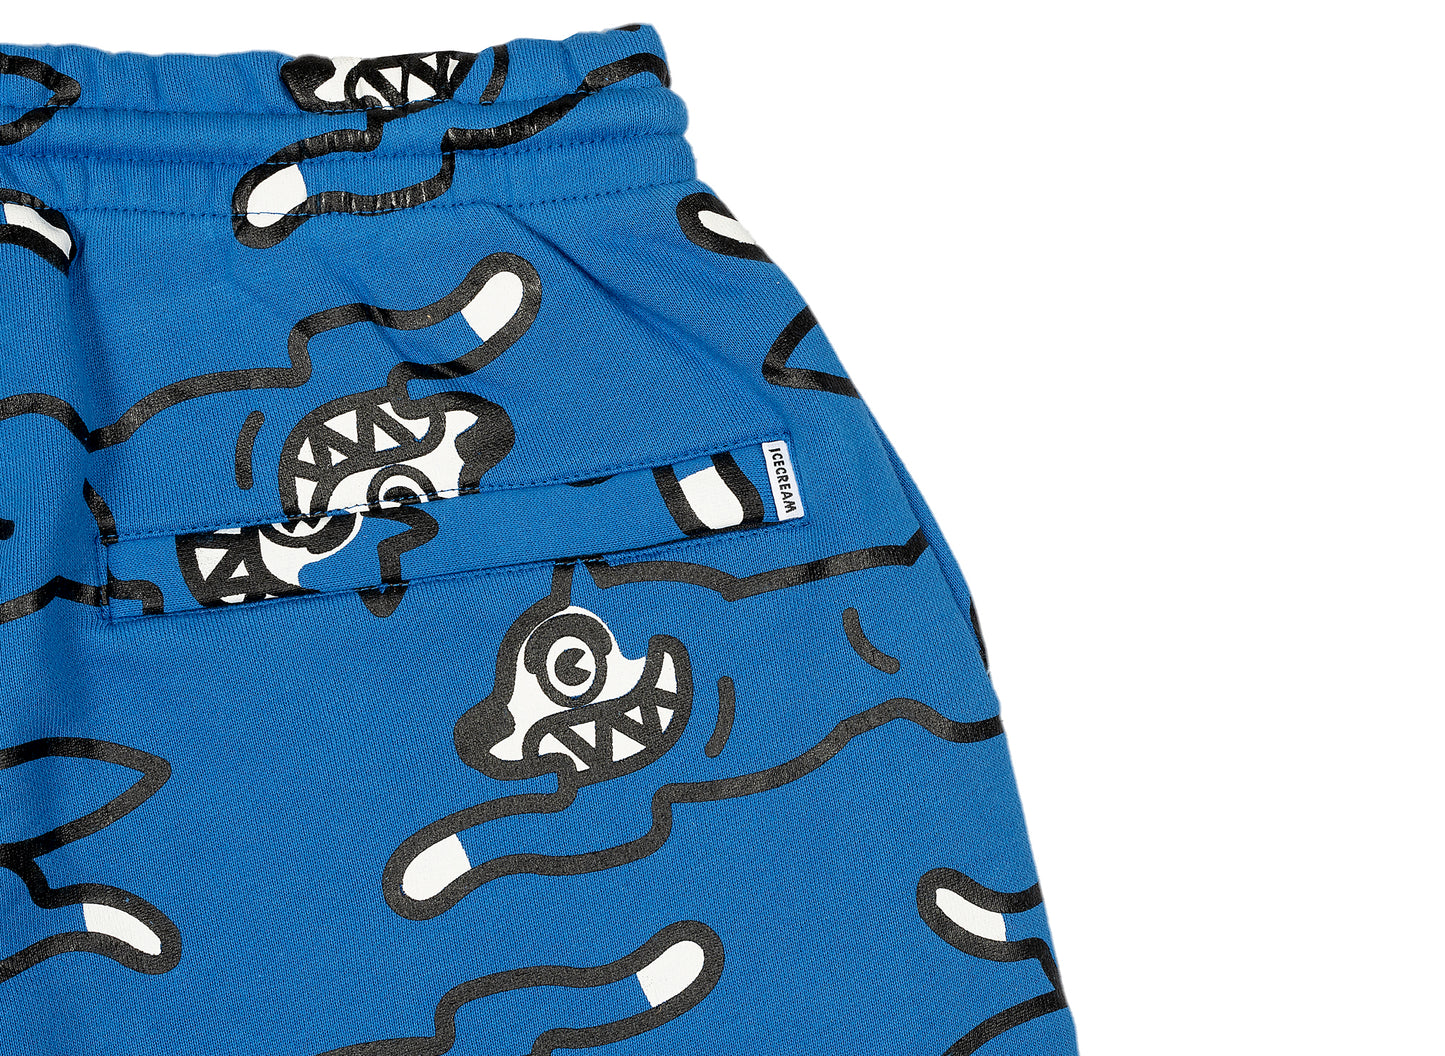 Ice Cream Bow Wow Shorts in Strong Blue